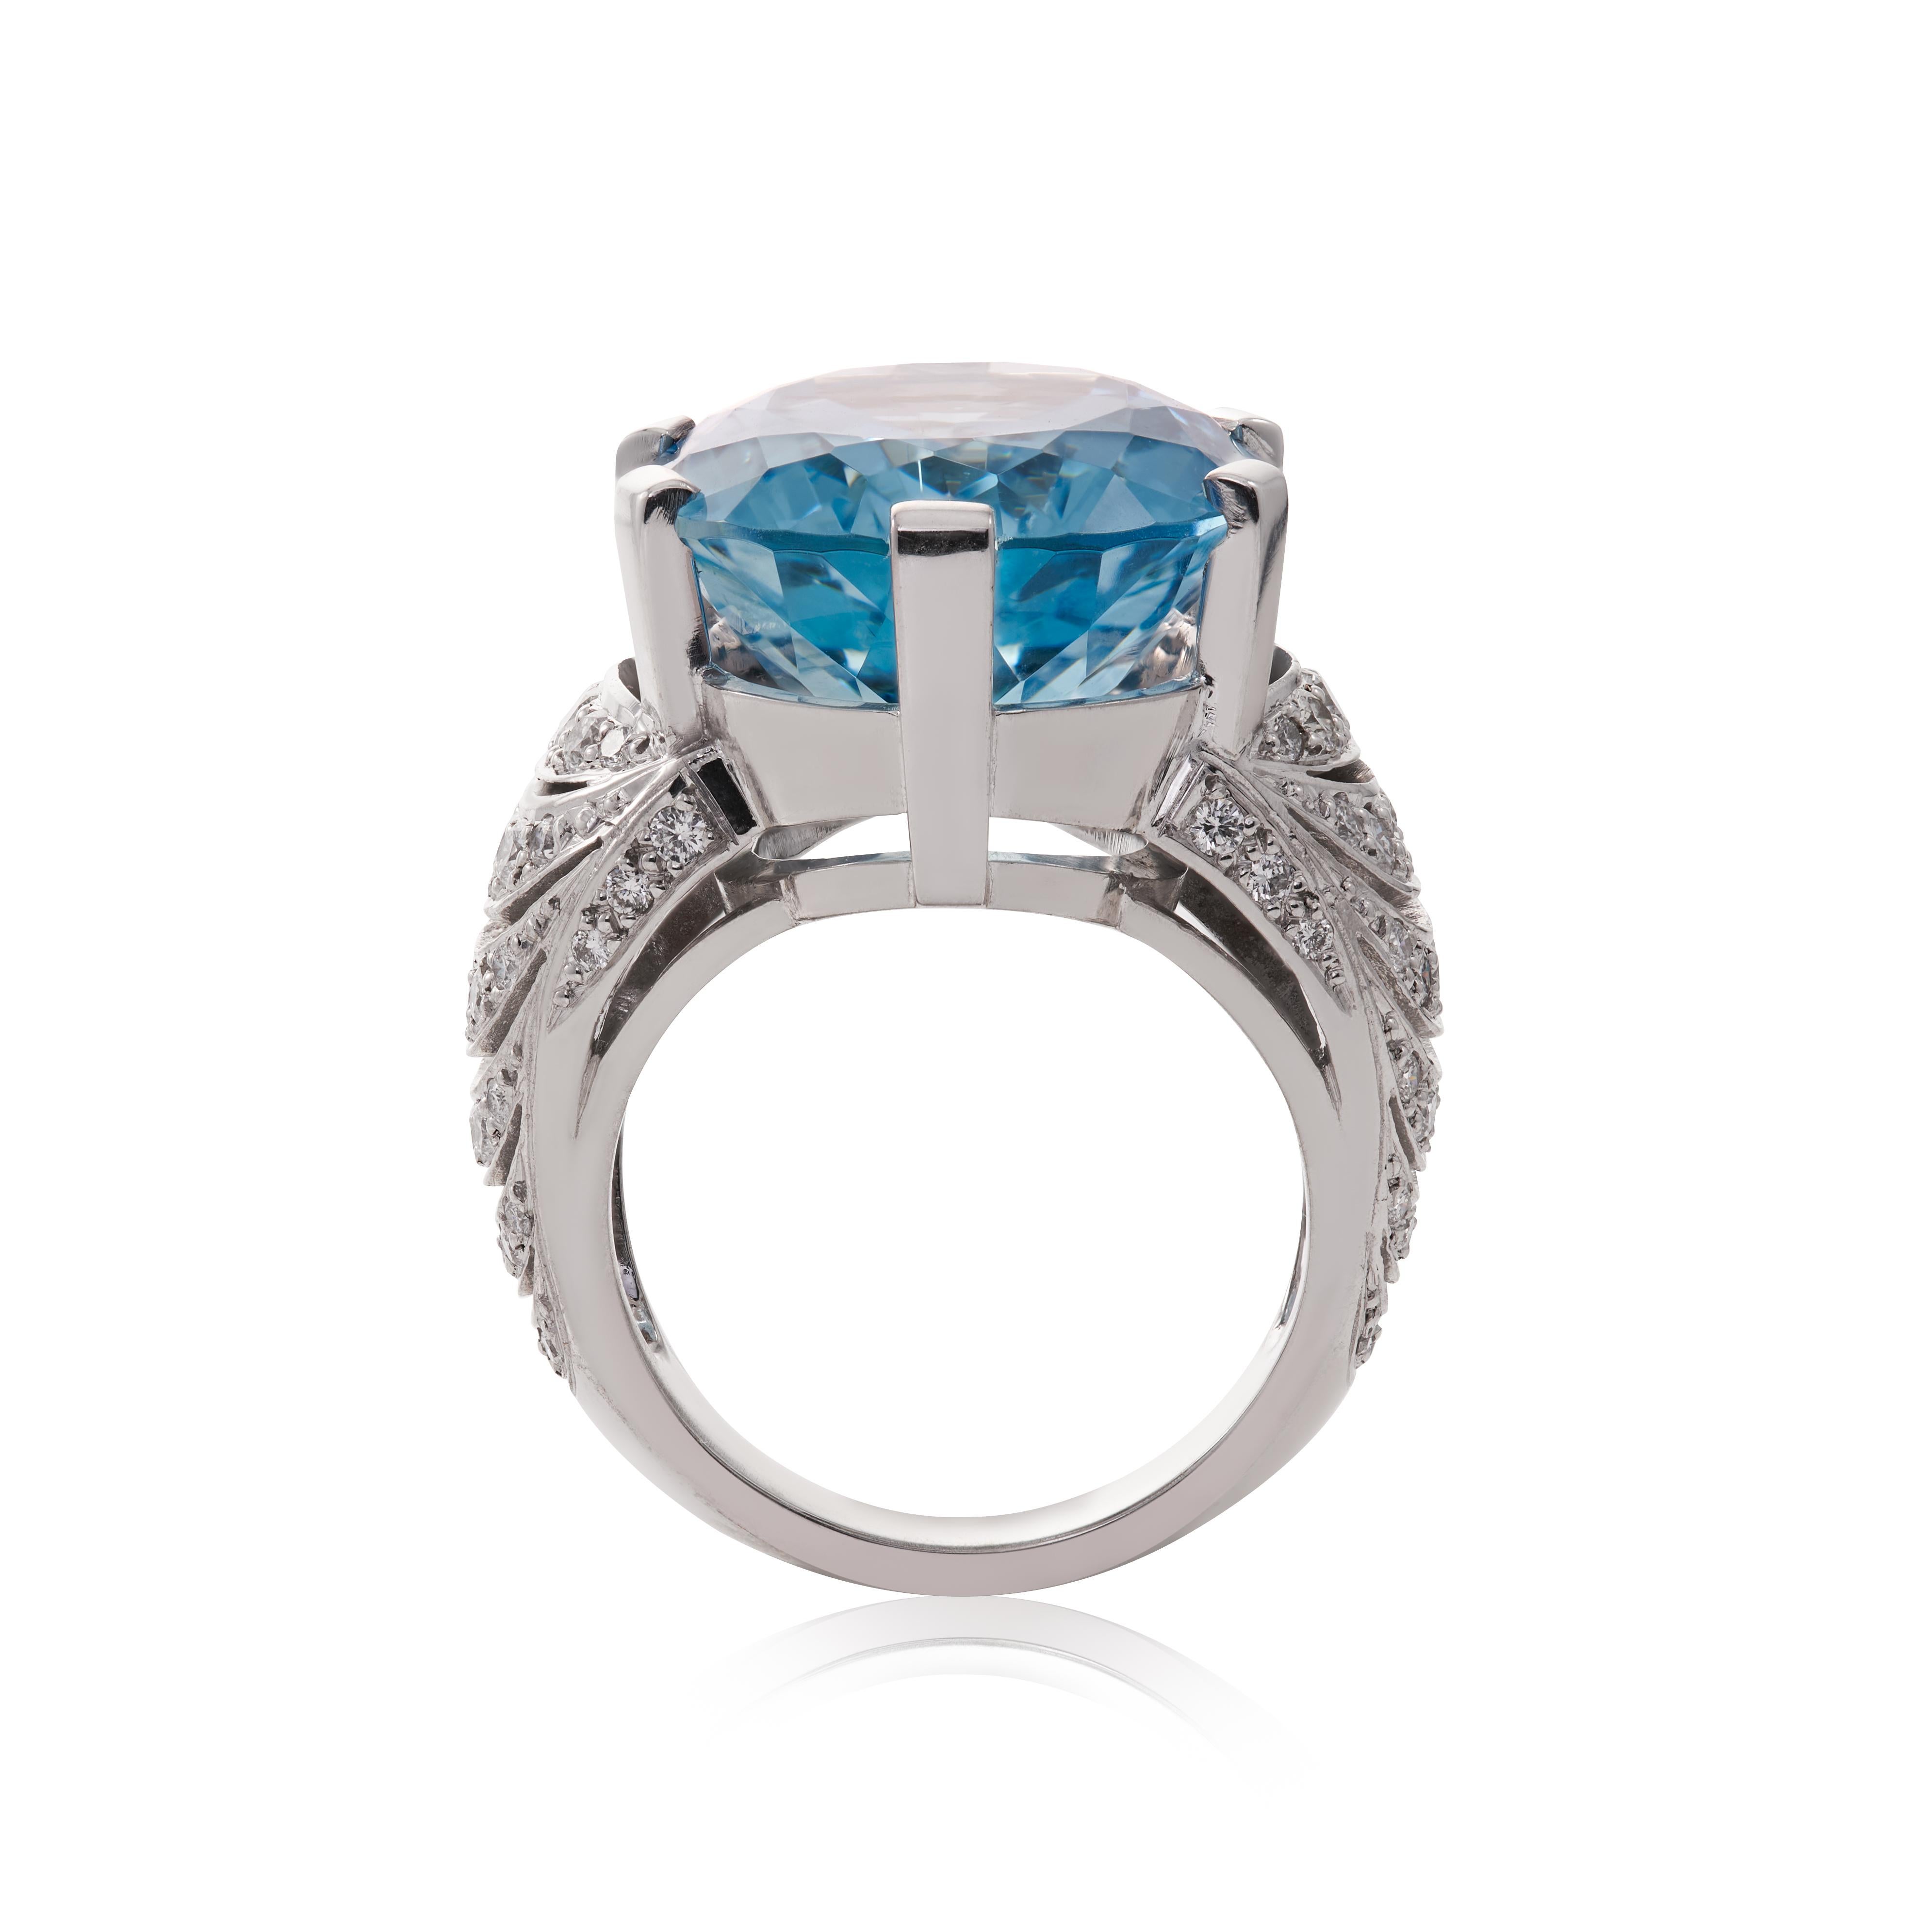 Contemporary E Wolfe & Co 17.86ct Aquamarine and Diamond 18ct White Gold Cocktail Ring For Sale